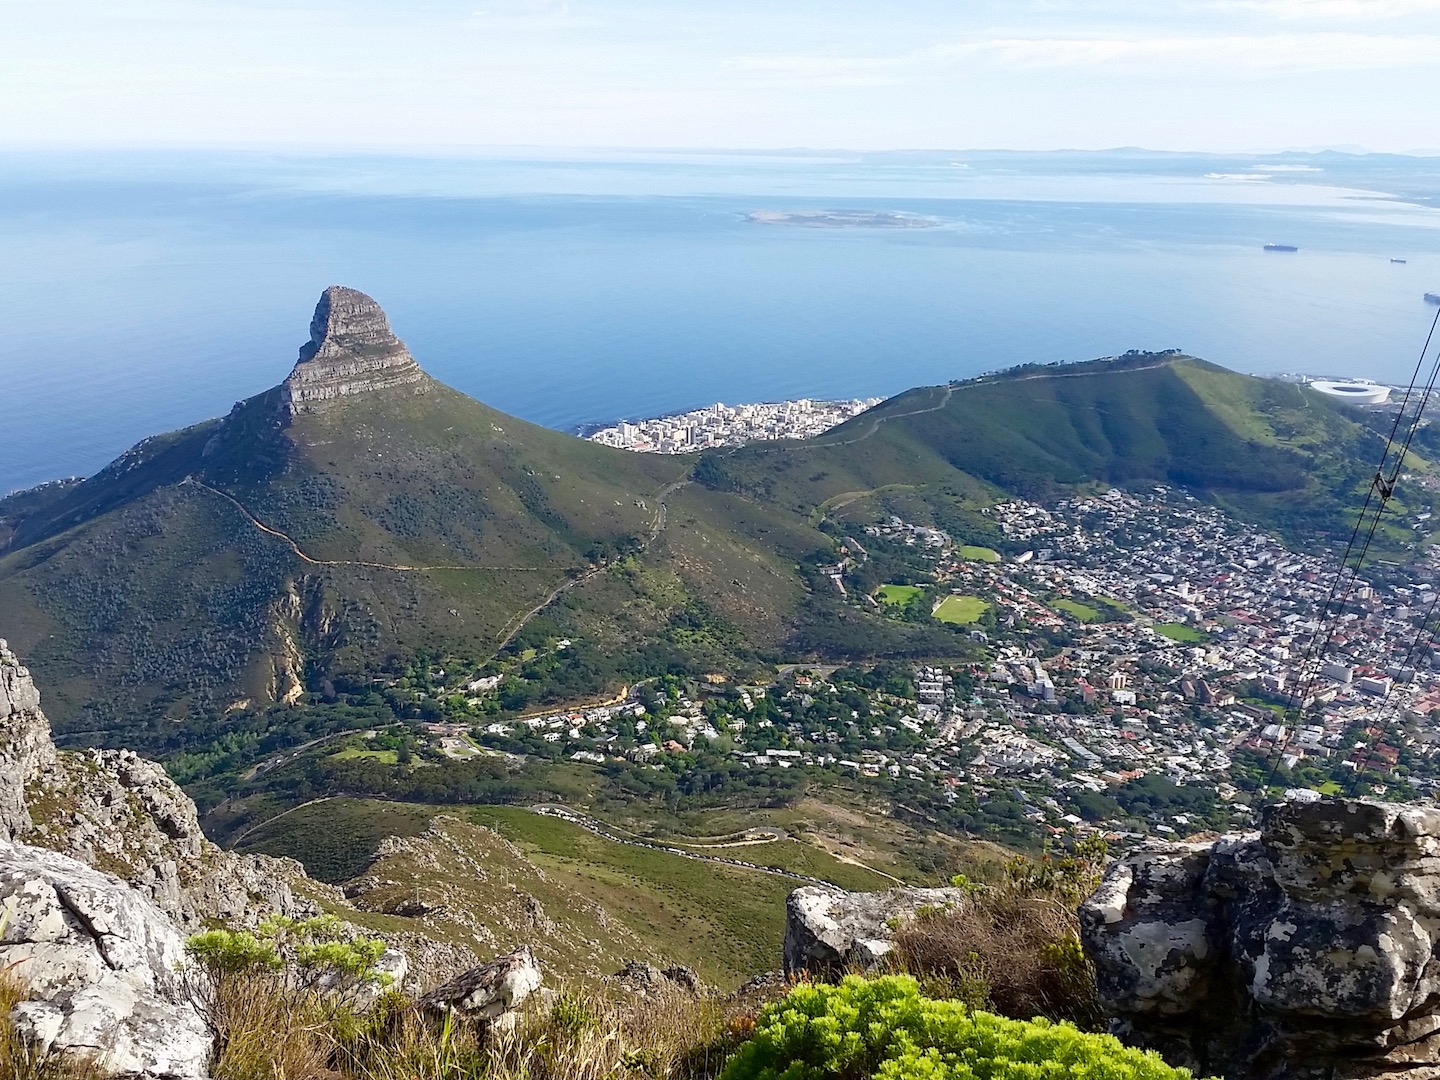 The best hike on Table Mountain